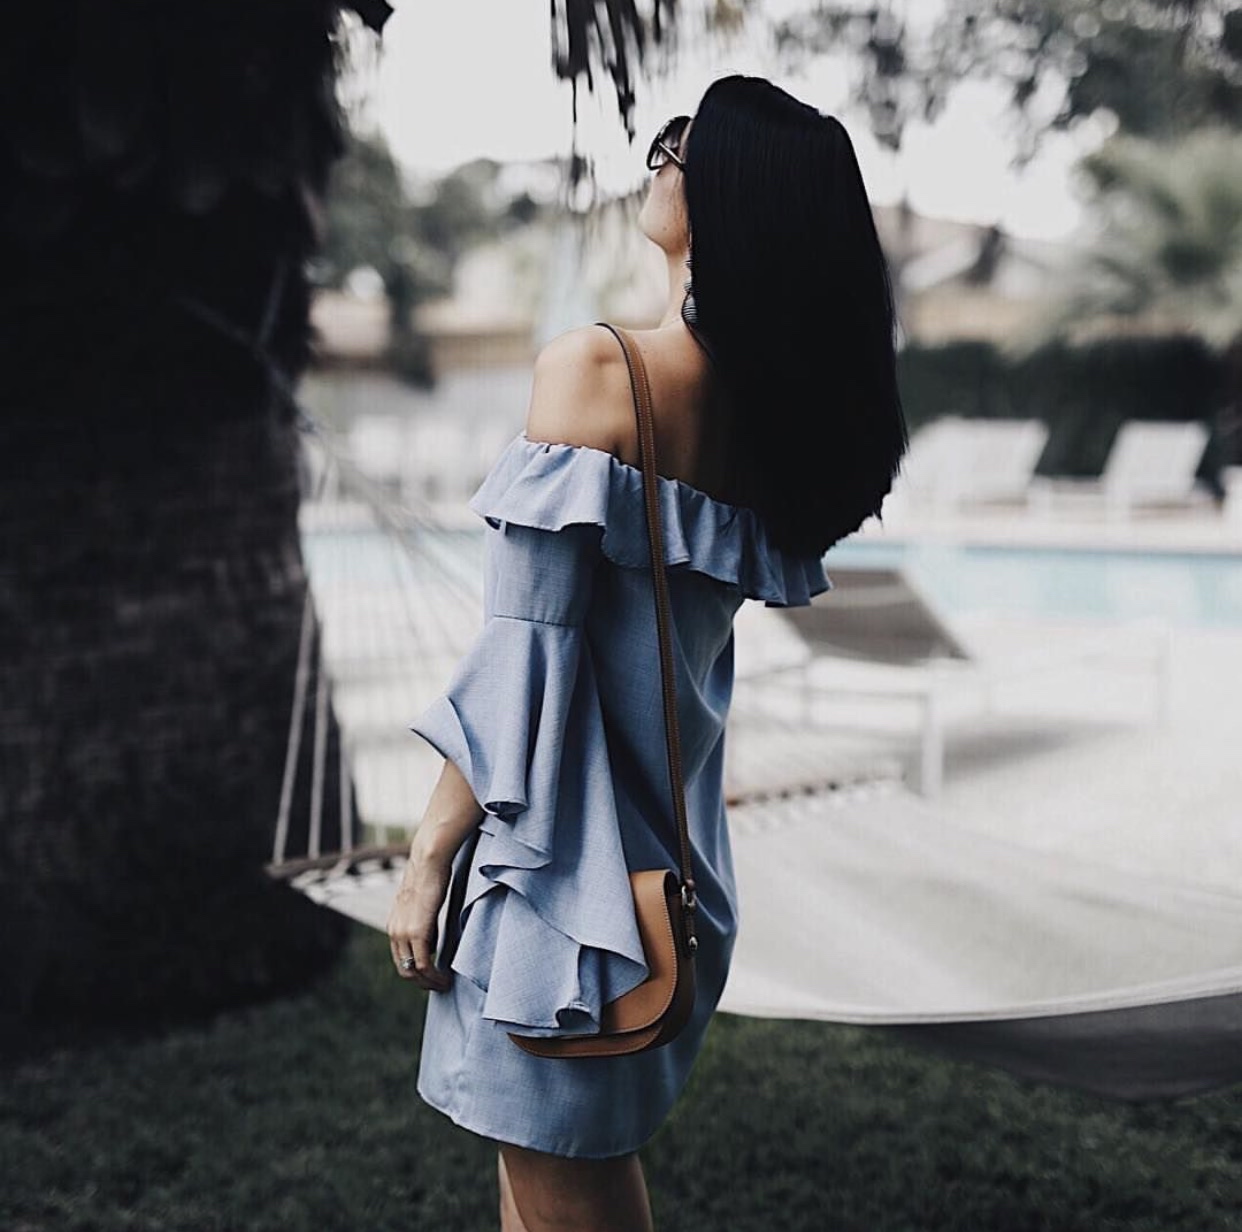 DTKAustin shares her favorite looks from her April Instagram posts over on the blog. The best of summer outfits all in one place! Click for more information and photos.